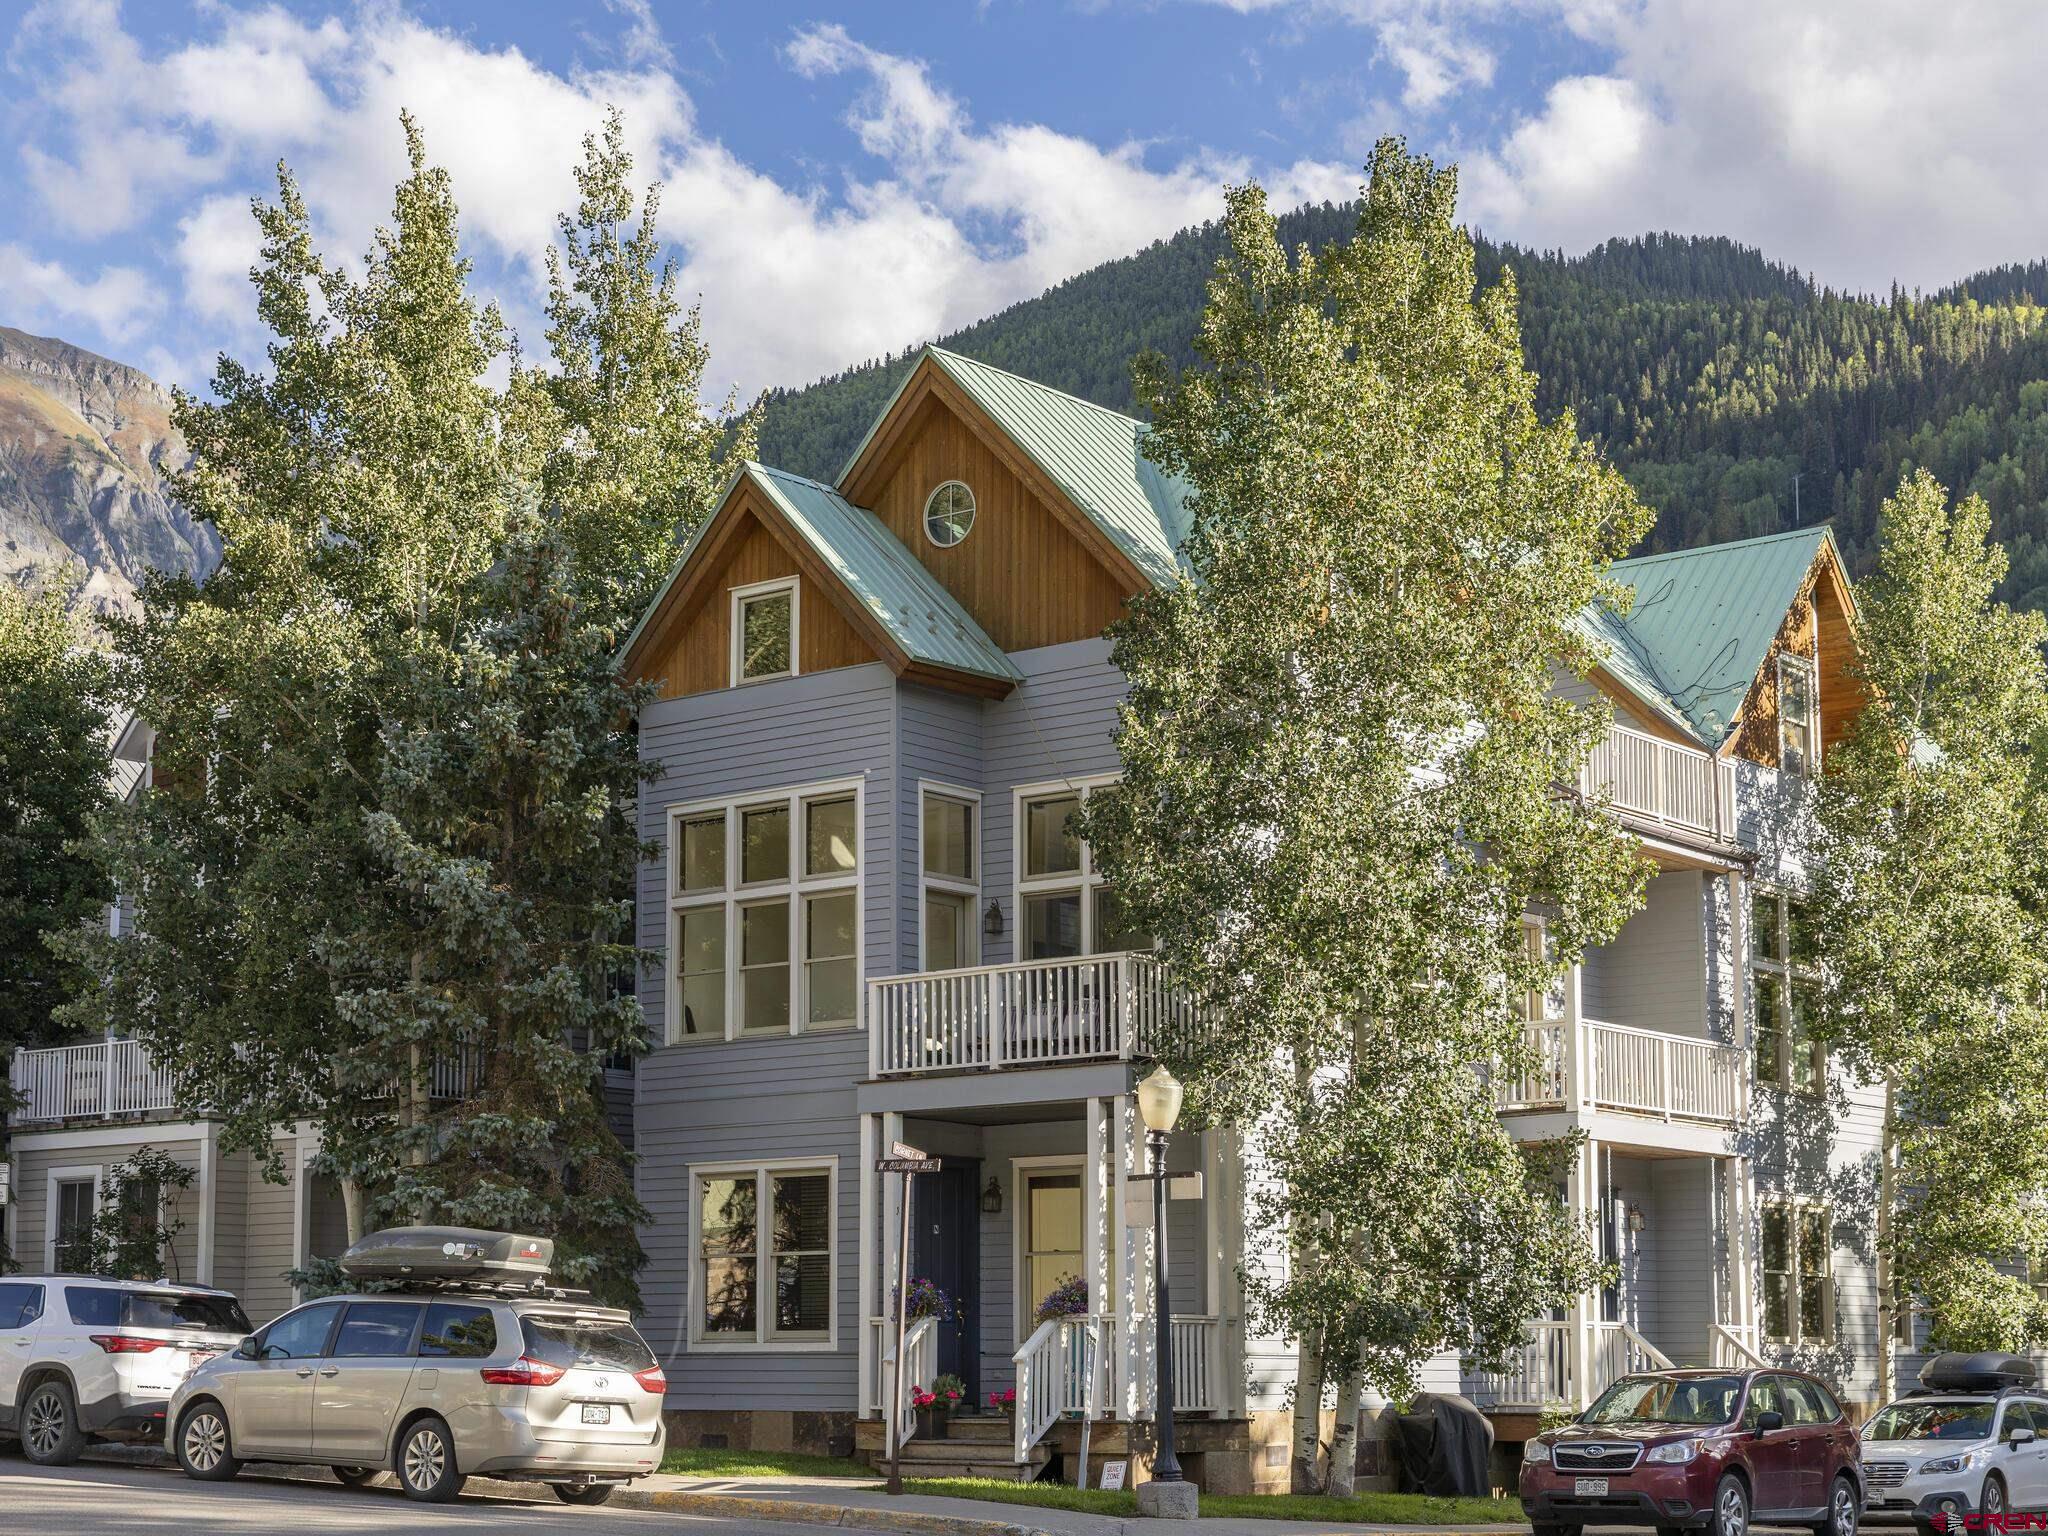 Unique opportunity to acquire strong income producing property in downtown Telluride with a total of 9 bedrooms. Multiple decks and a three car garage. Purchase includes architect plans for conversion from the existing triplex configuration to a duplex comprised of a large four bedroom home and a one bedroom lock-off without need for HARC approval.